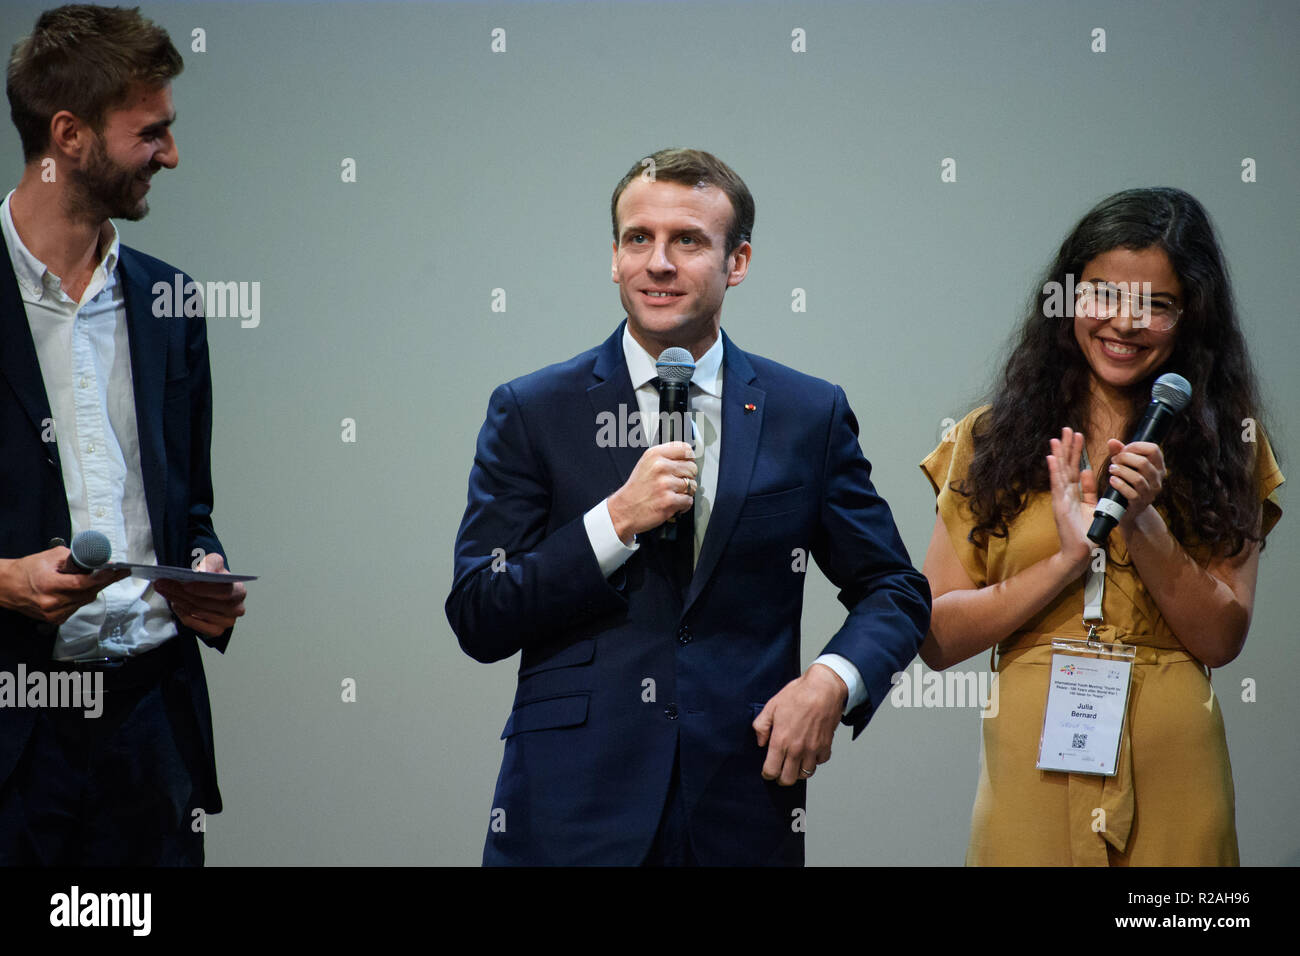 Berlin Germany 18th Nov 2018 Emmanuel Macron 2nd From Left President Of France Talks With Young People On Stage About Concepts And Ideas For Peace At The Event Youth For Peace